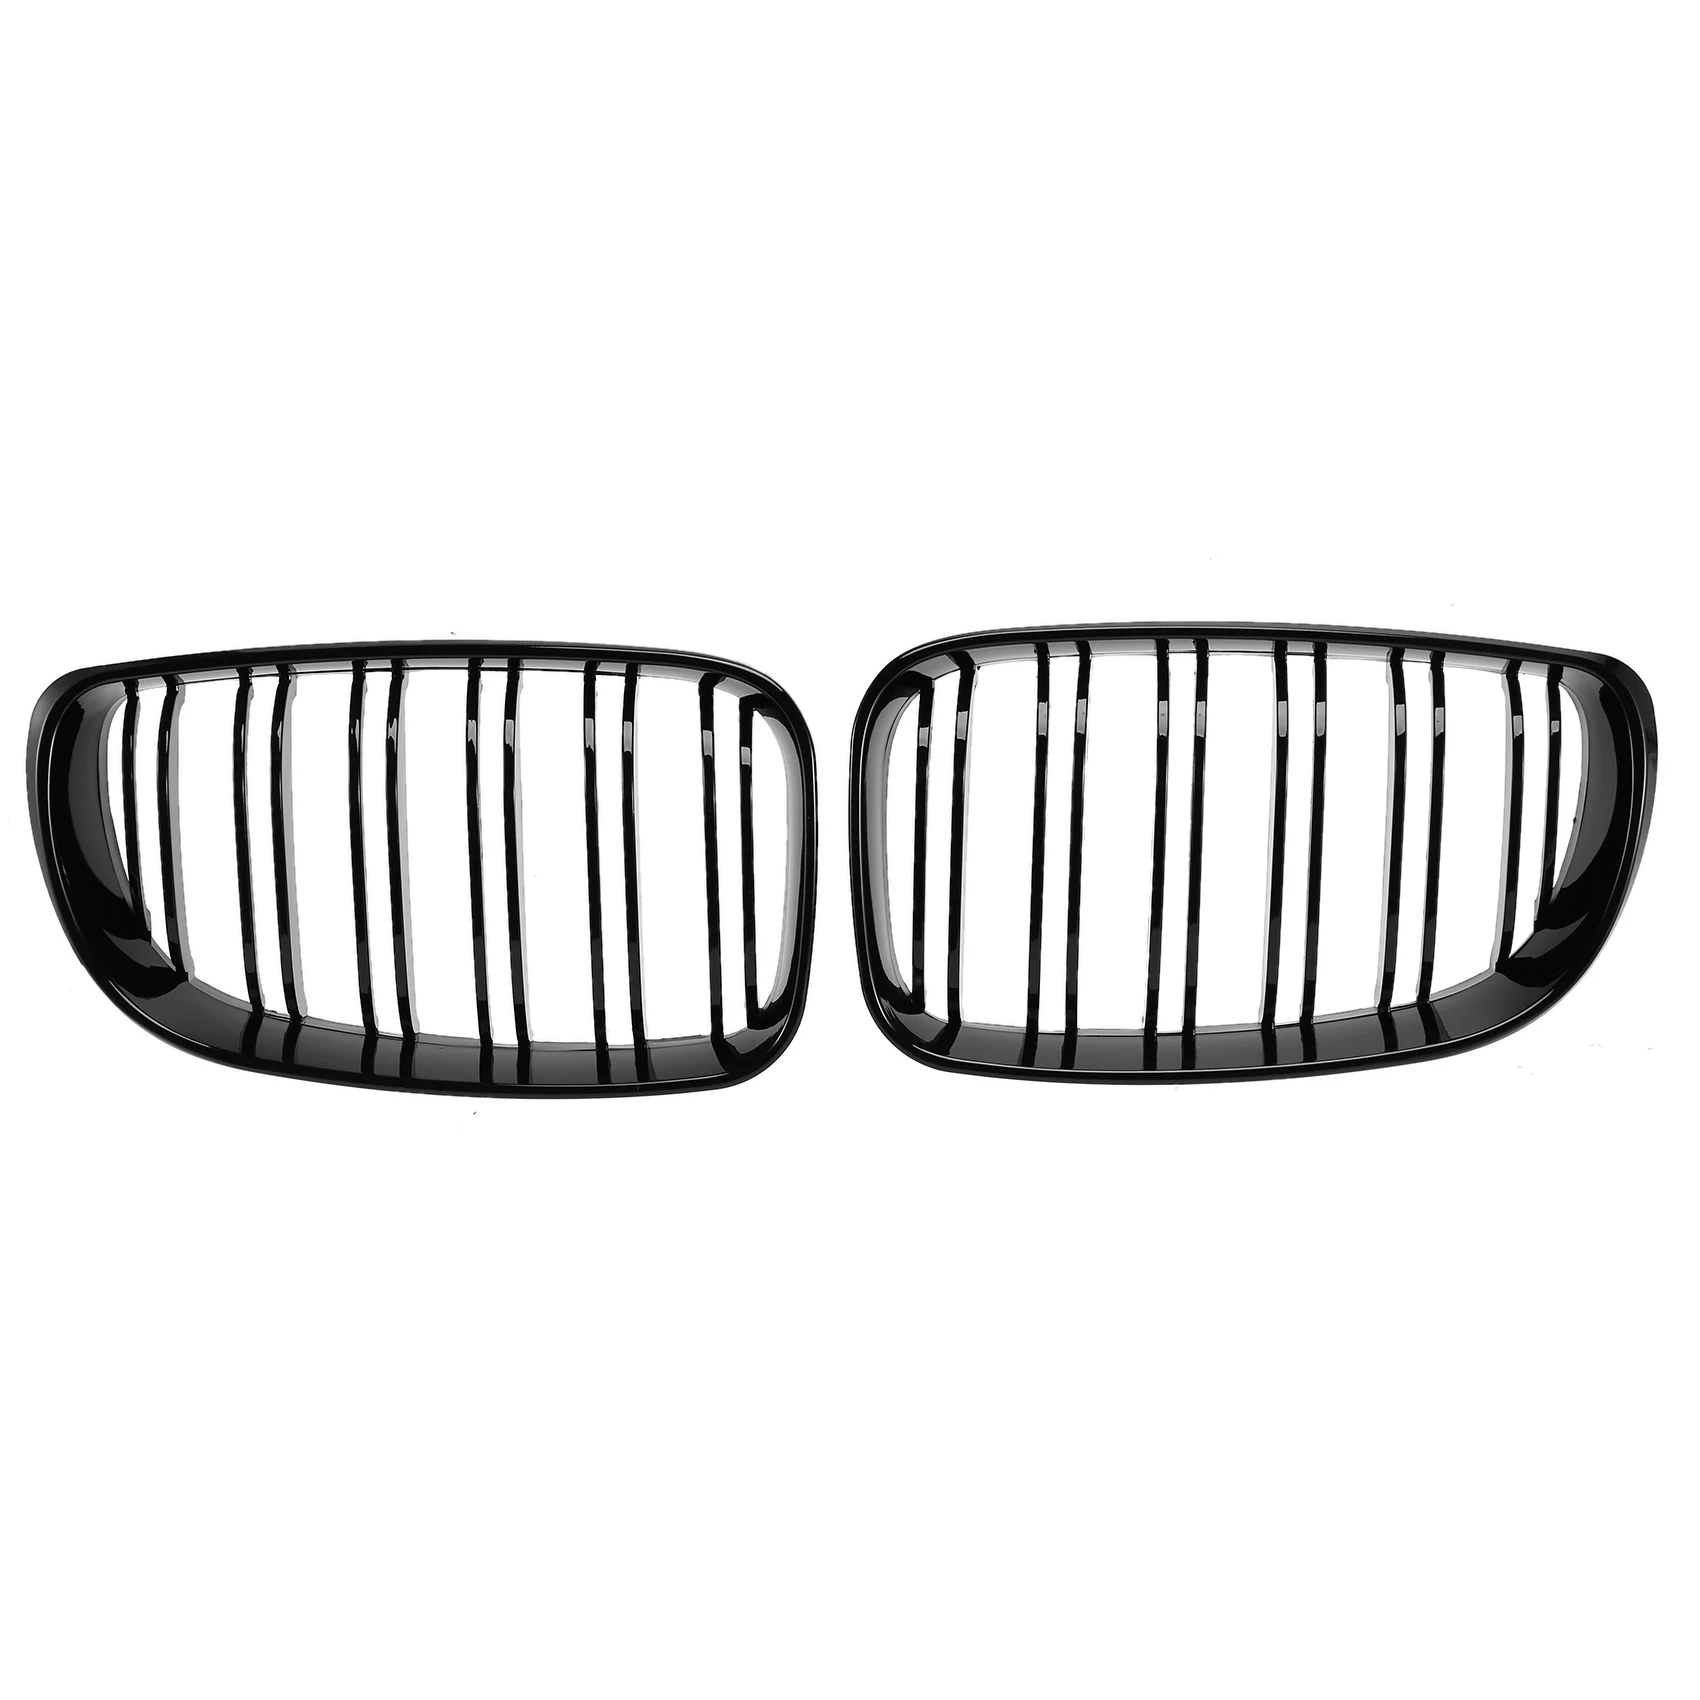 

Glossy Black Dual Slats Front Kidney Grille Grill Replacement for BMW E81 E87 E82 E88 120I 128I 130I 135I Selected 2007-2011